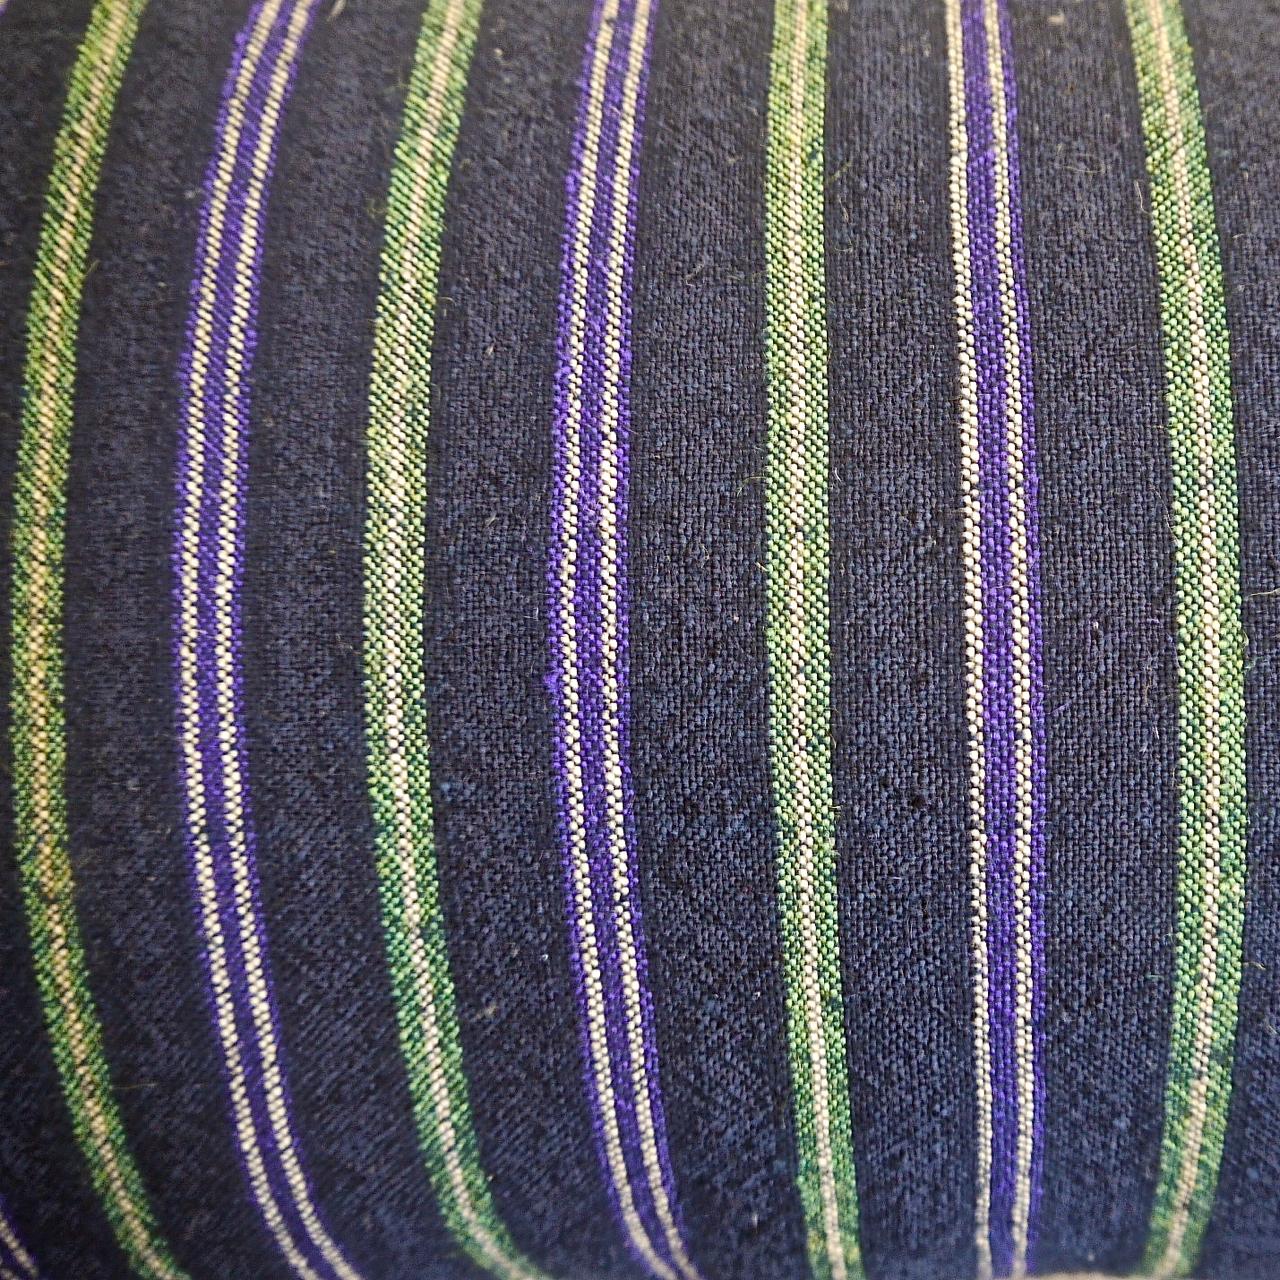 French 19th century woven cotton and wool striped cushion of dark indigo with white, green and purple colours. Original piece made with an 'as found ' border on one side of a French 19th century cotton check. Self backed and slip-stitched closed